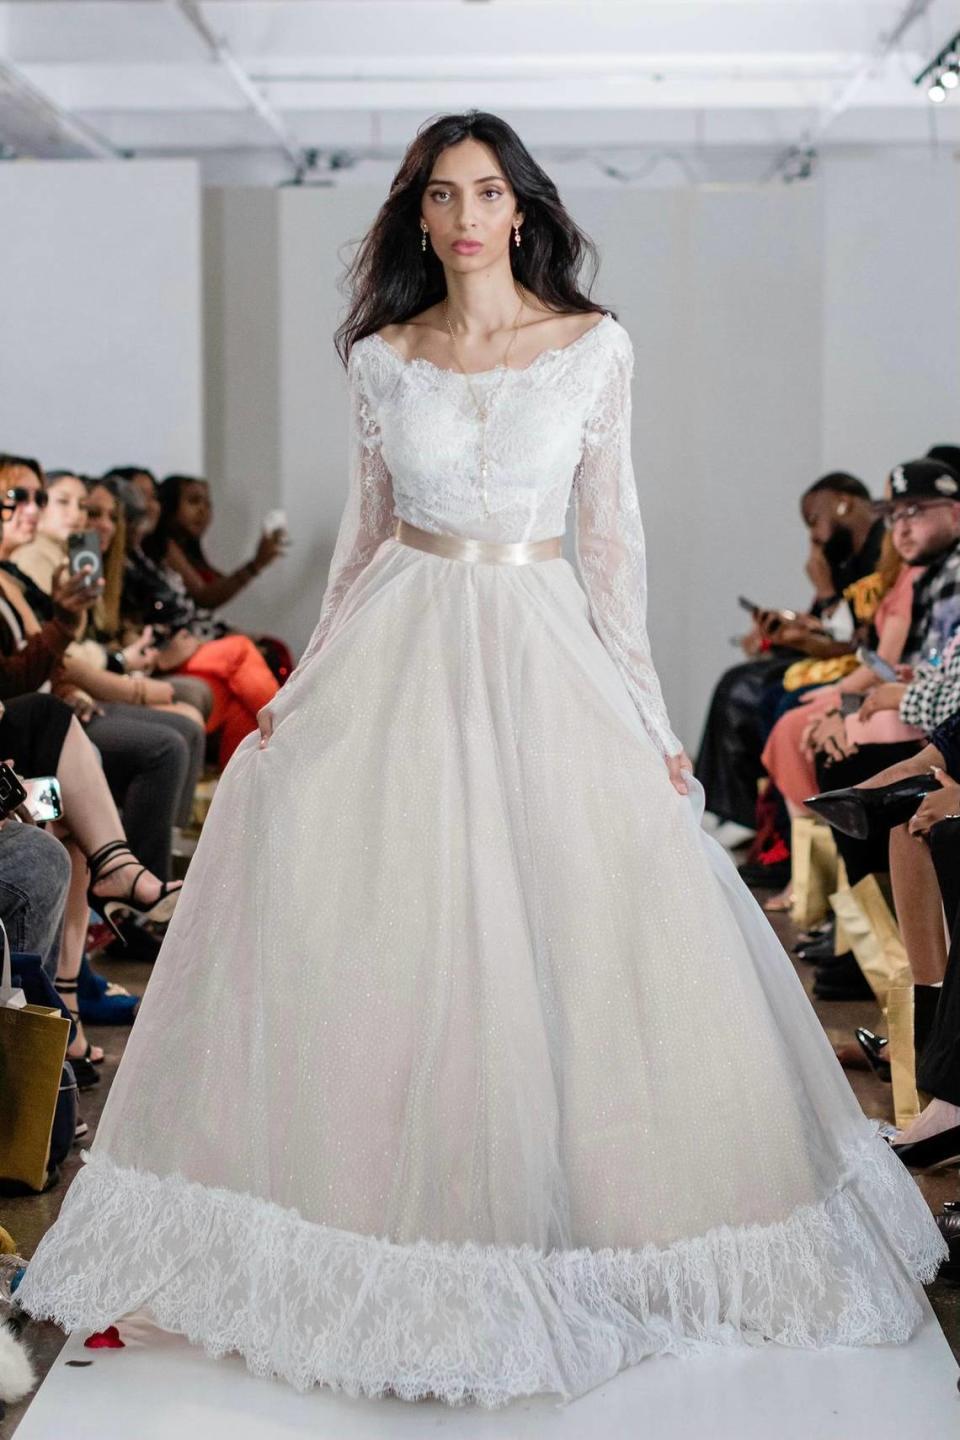 One of the gowns that Alicia Ybarra of Vanya Designs Bridal showed at New York Fashion Week last month. Hunter Valentino/Courtesy photo